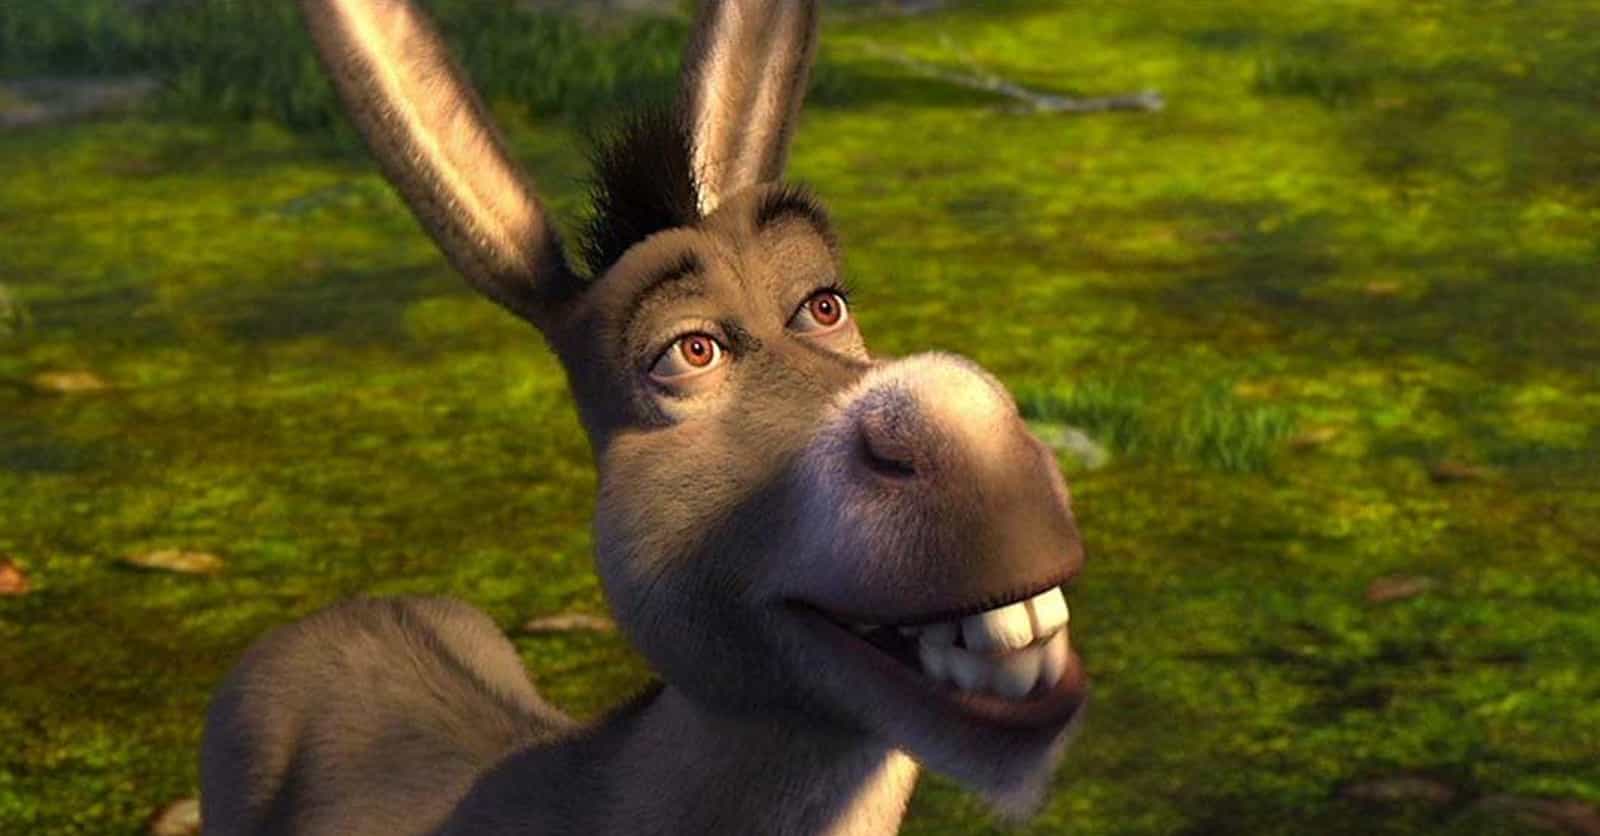 Fans Share Things About Donkey From 'Shrek' We've Never Thought About Before